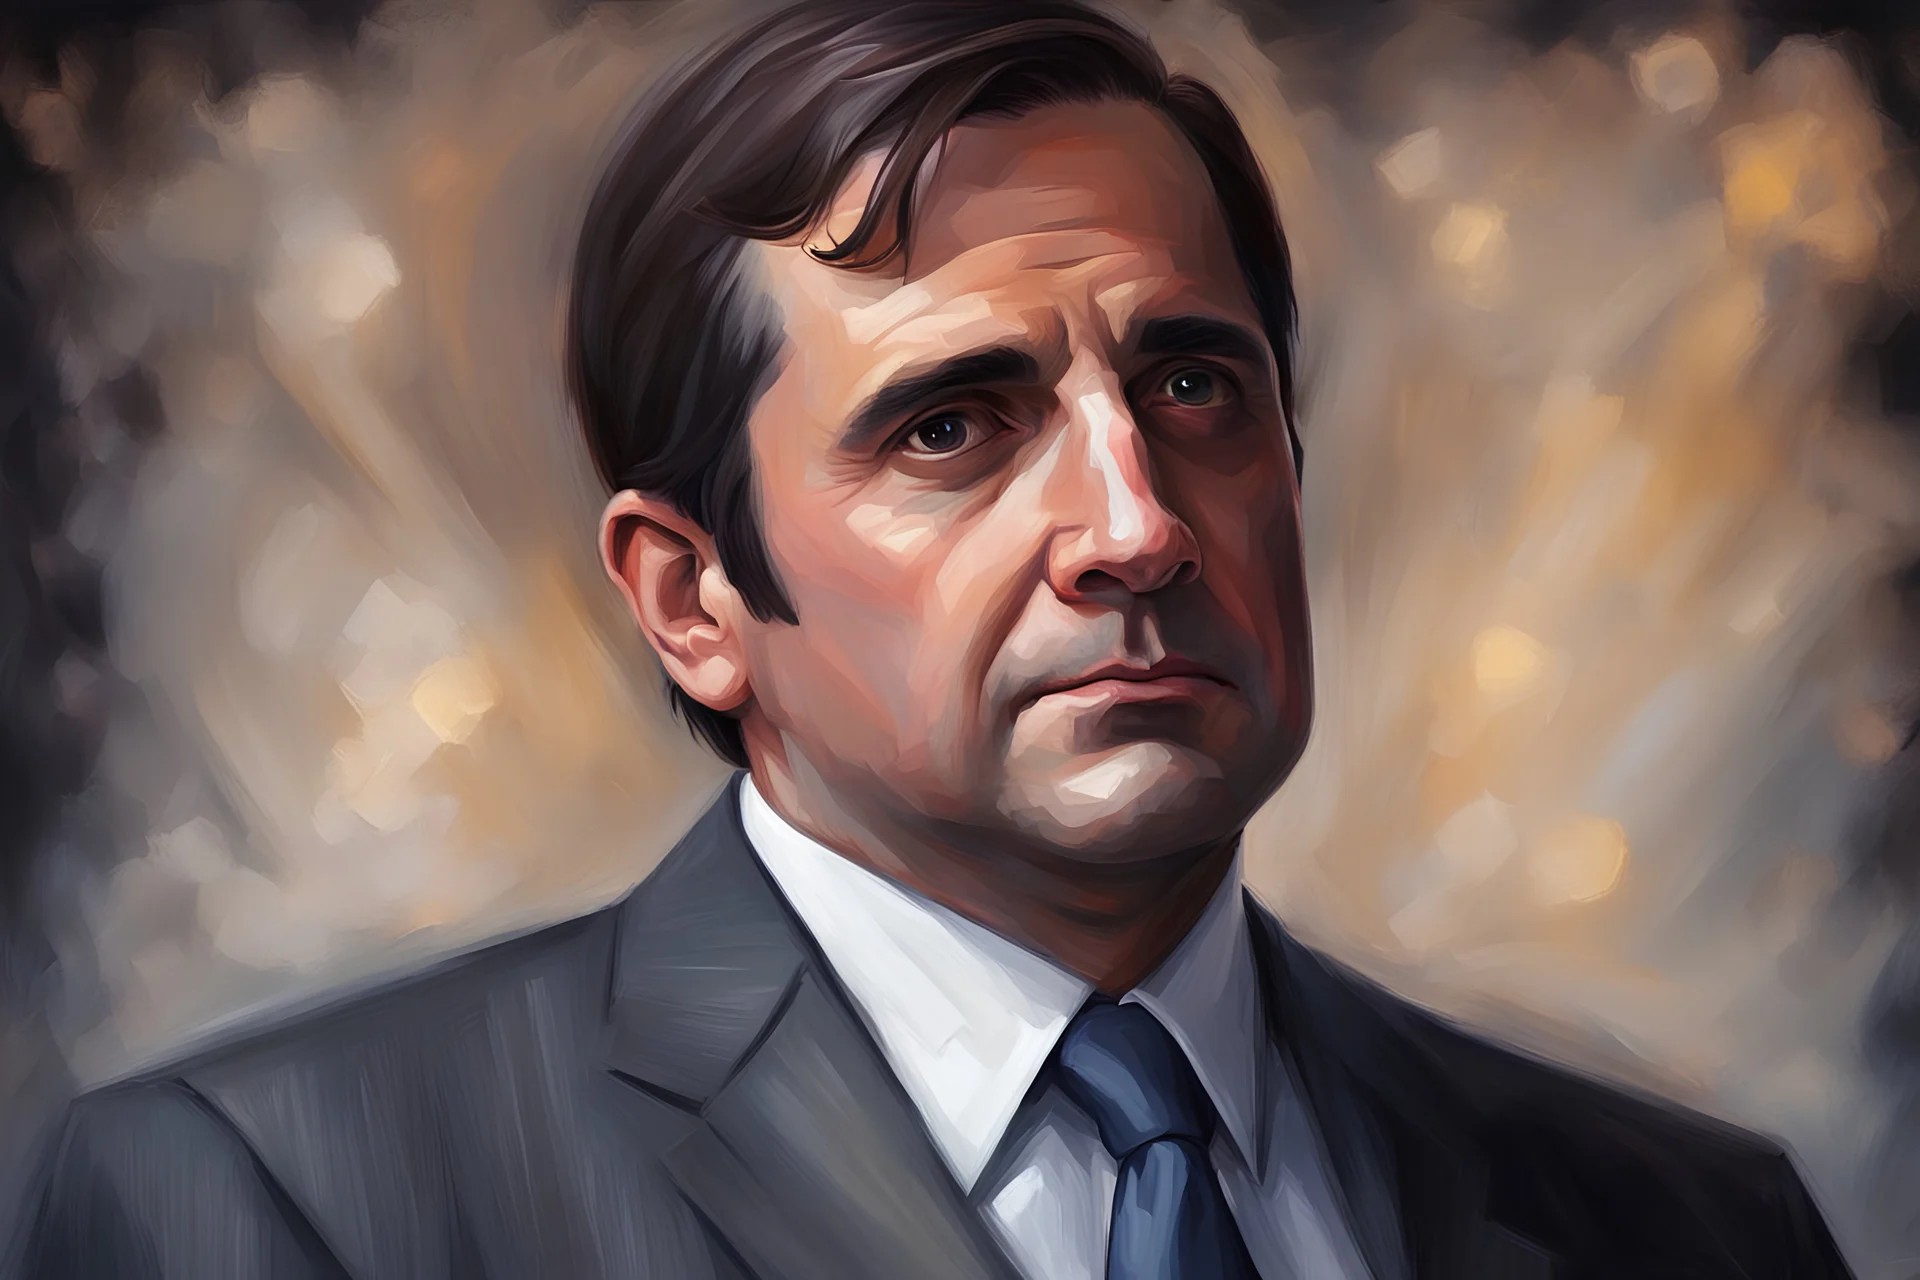 fillmmaker michael scott. oil painting style with dark ilumination and renascense style